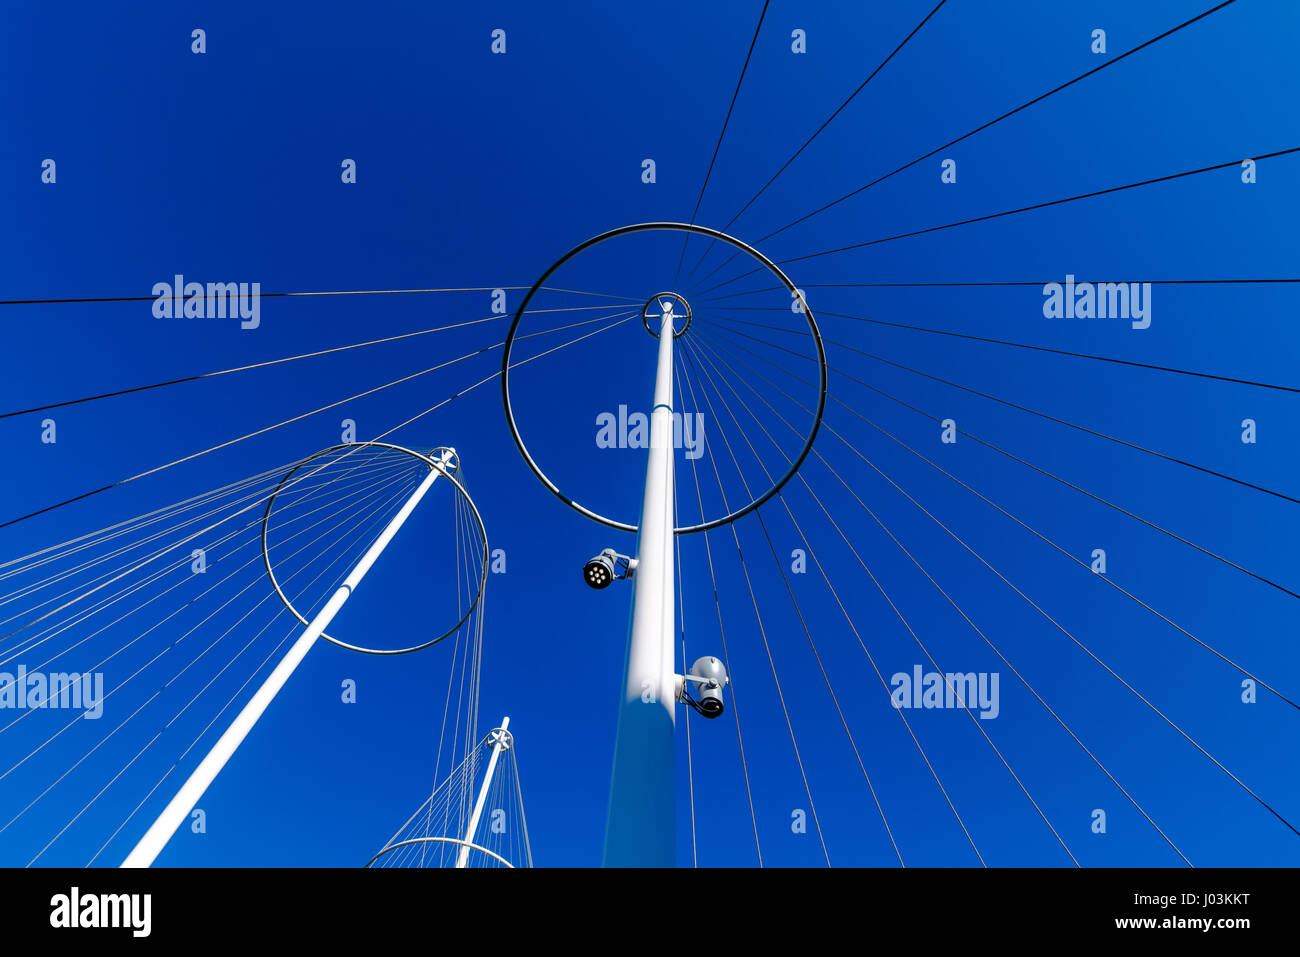 Abstract architecture, metallic posts with strings against blue sky, unusual low angle view Stock Photo